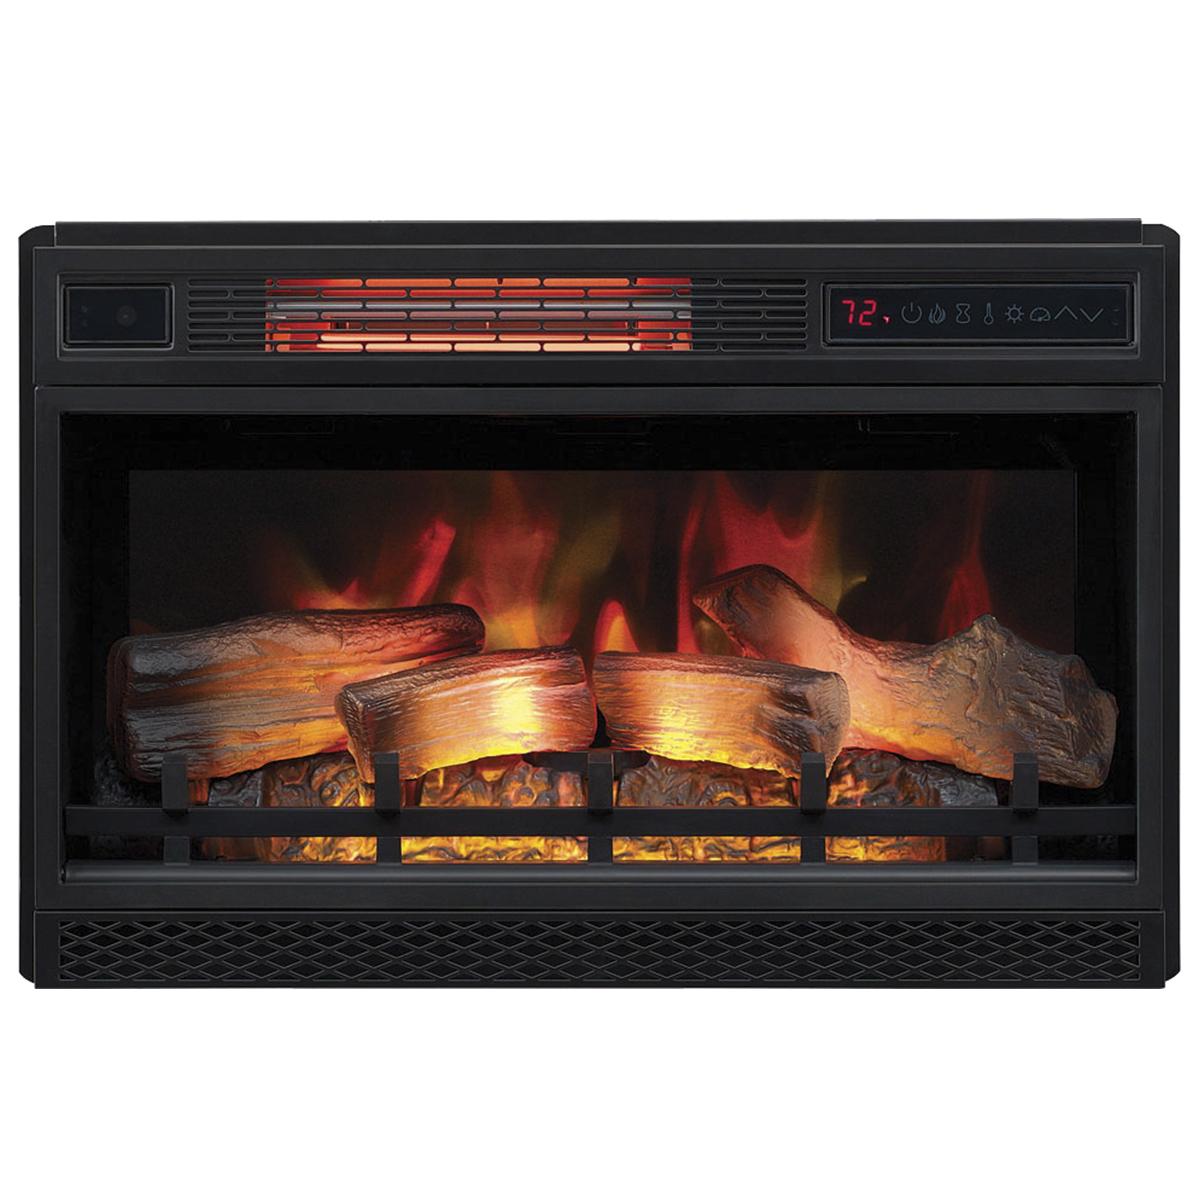 Portable Fireplace with Mantel New Fabio Flames Greatlin 3 Piece Fireplace Entertainment Wall